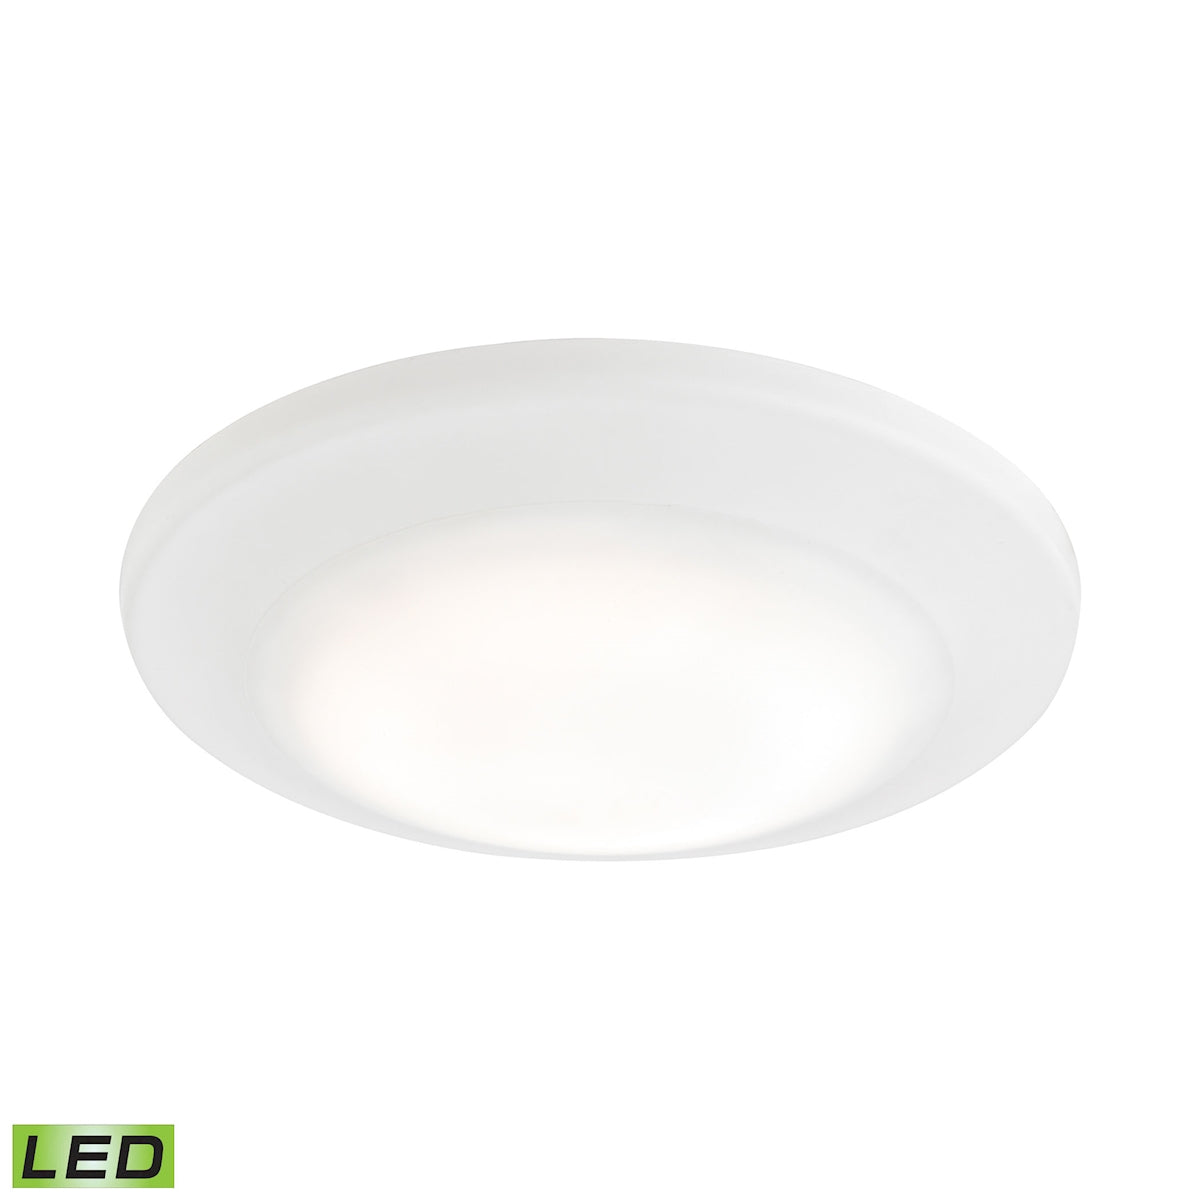 ELK Lighting MLE1200-5-30 Plandome 1-Light Recessed Light in Clean White with Glass Diffuser